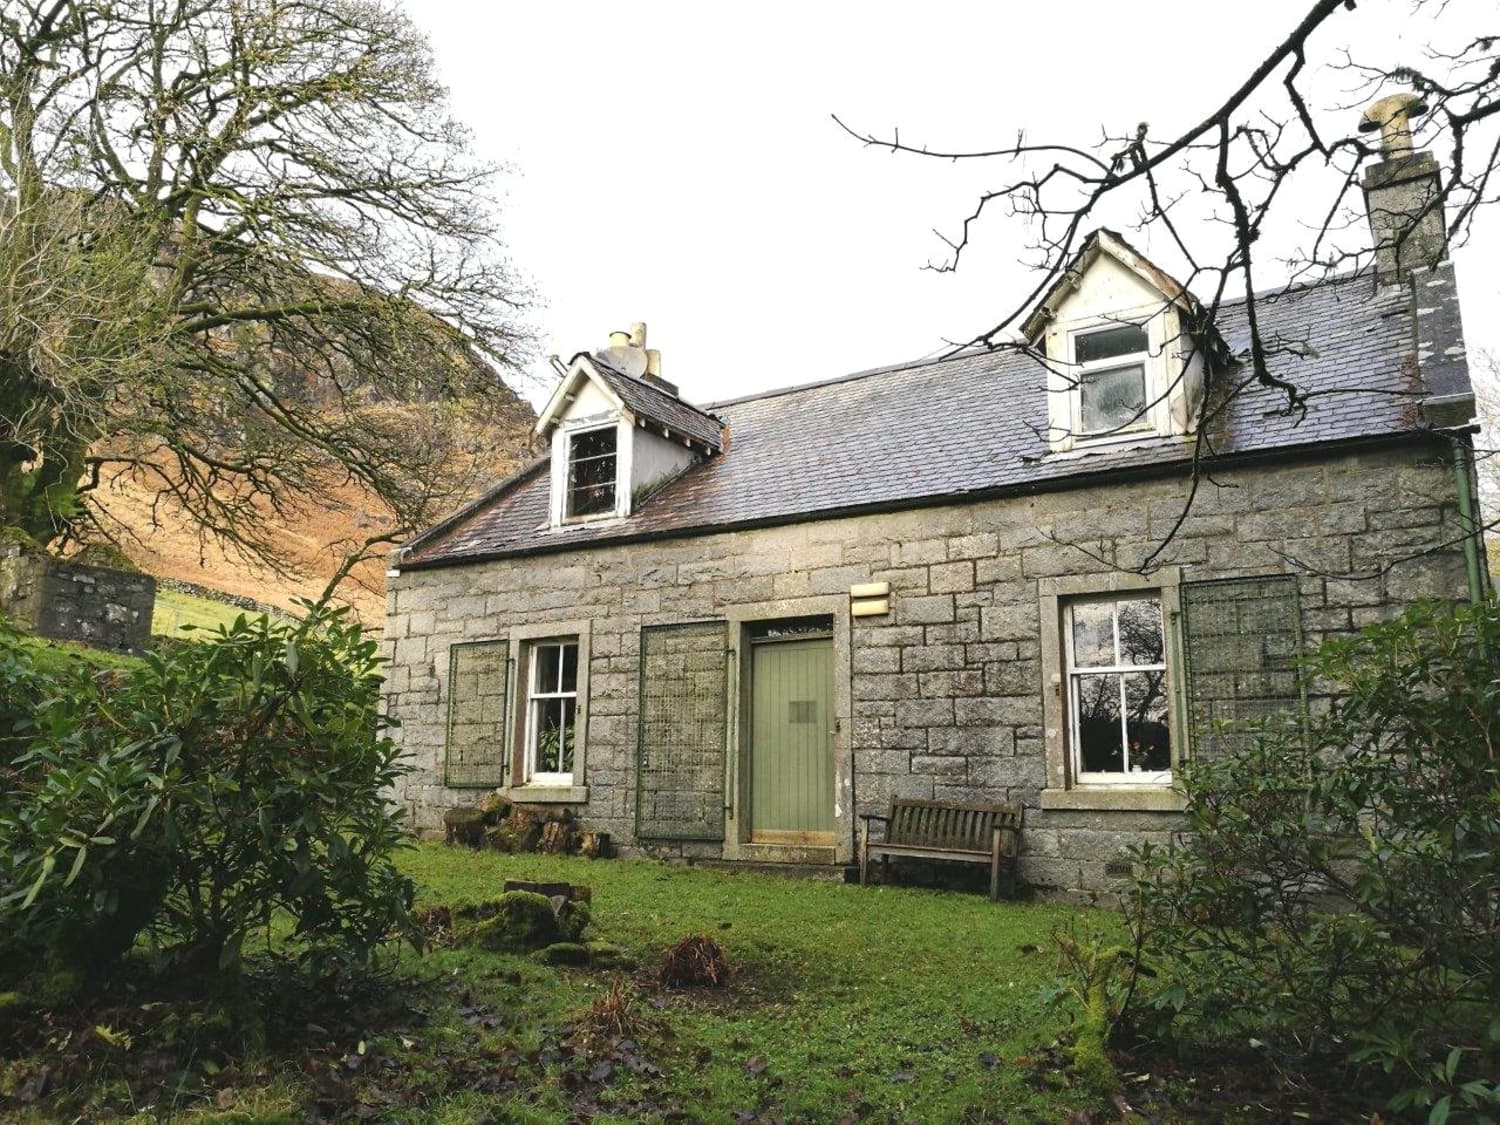 Remote Scottish House For Sale Fixer Upper Apartment Therapy